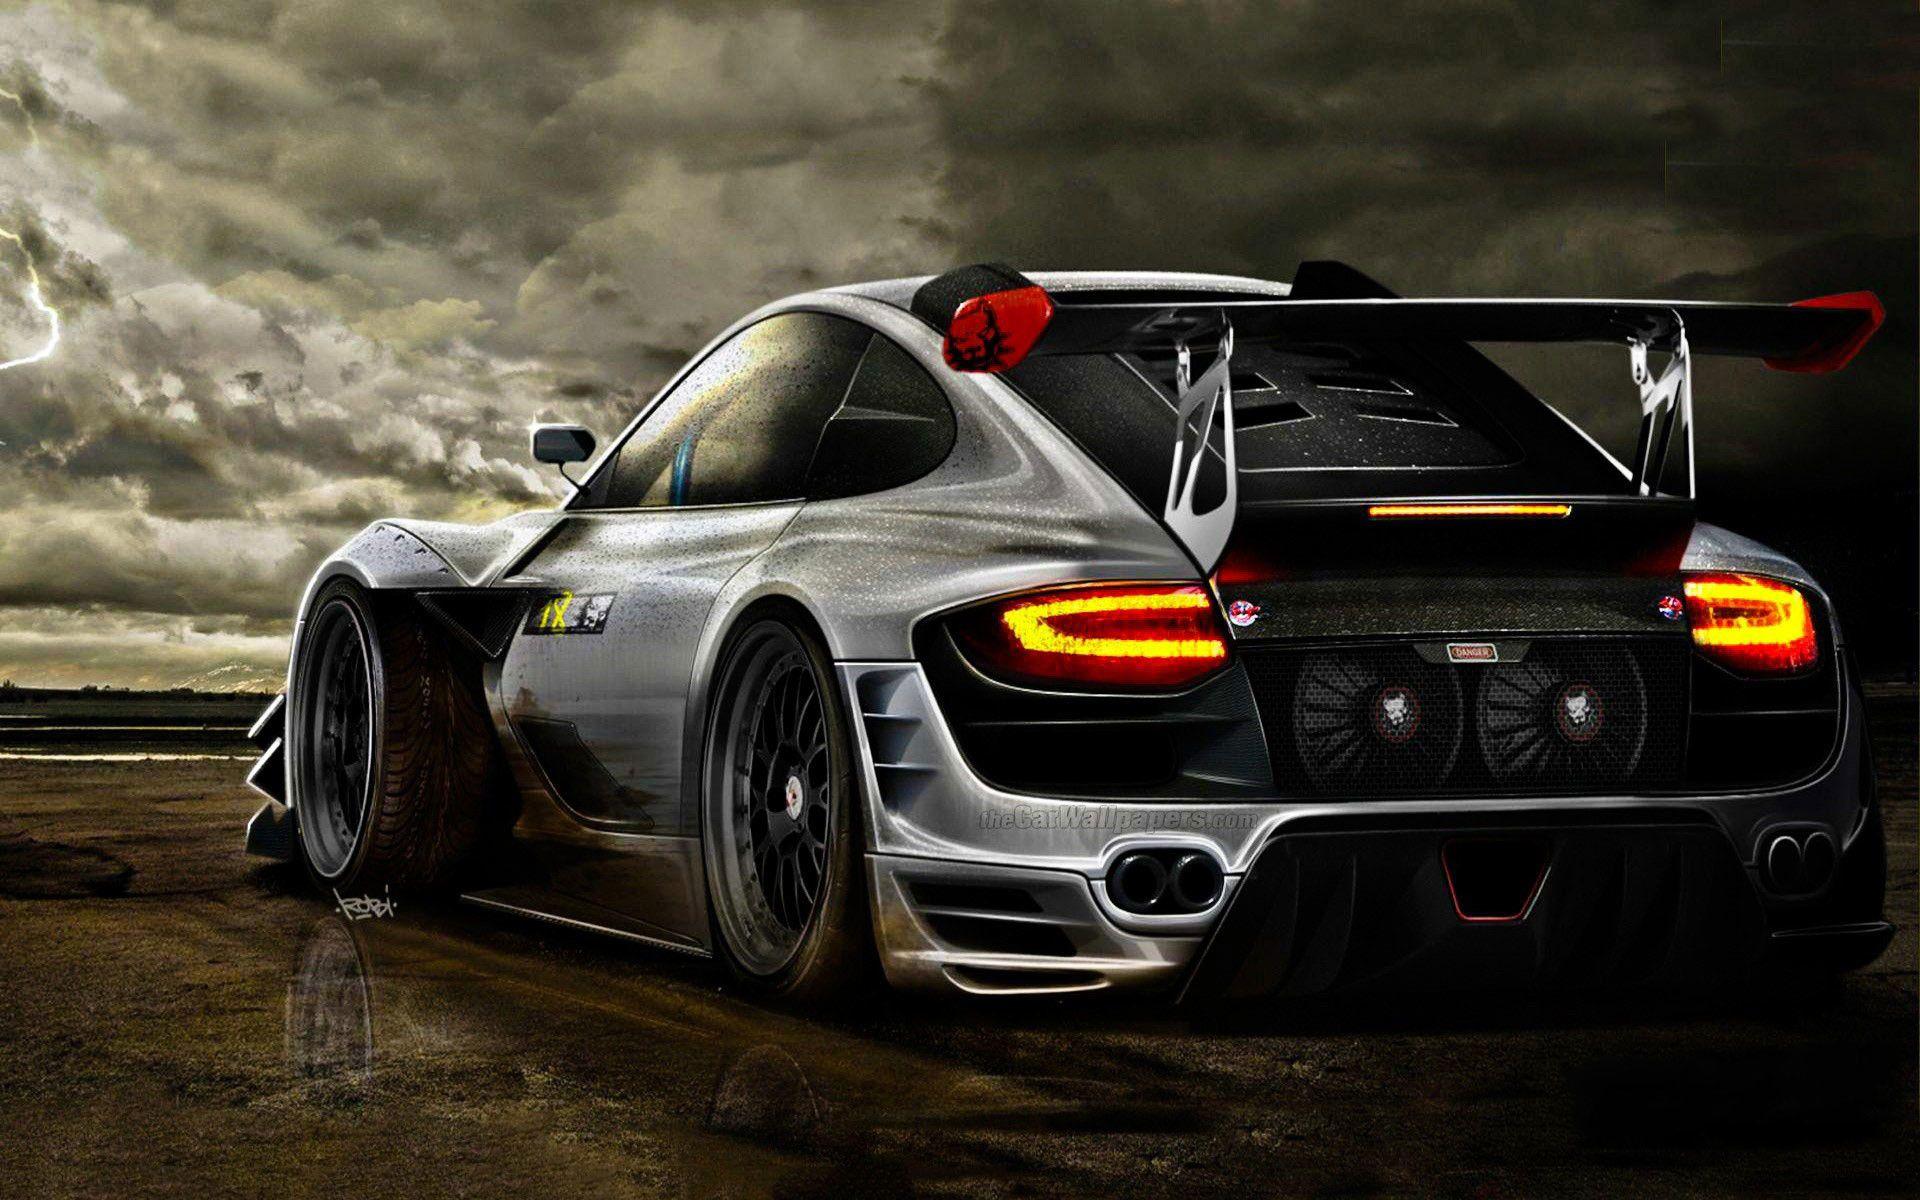 Wallpapers Of Sports Car Racing